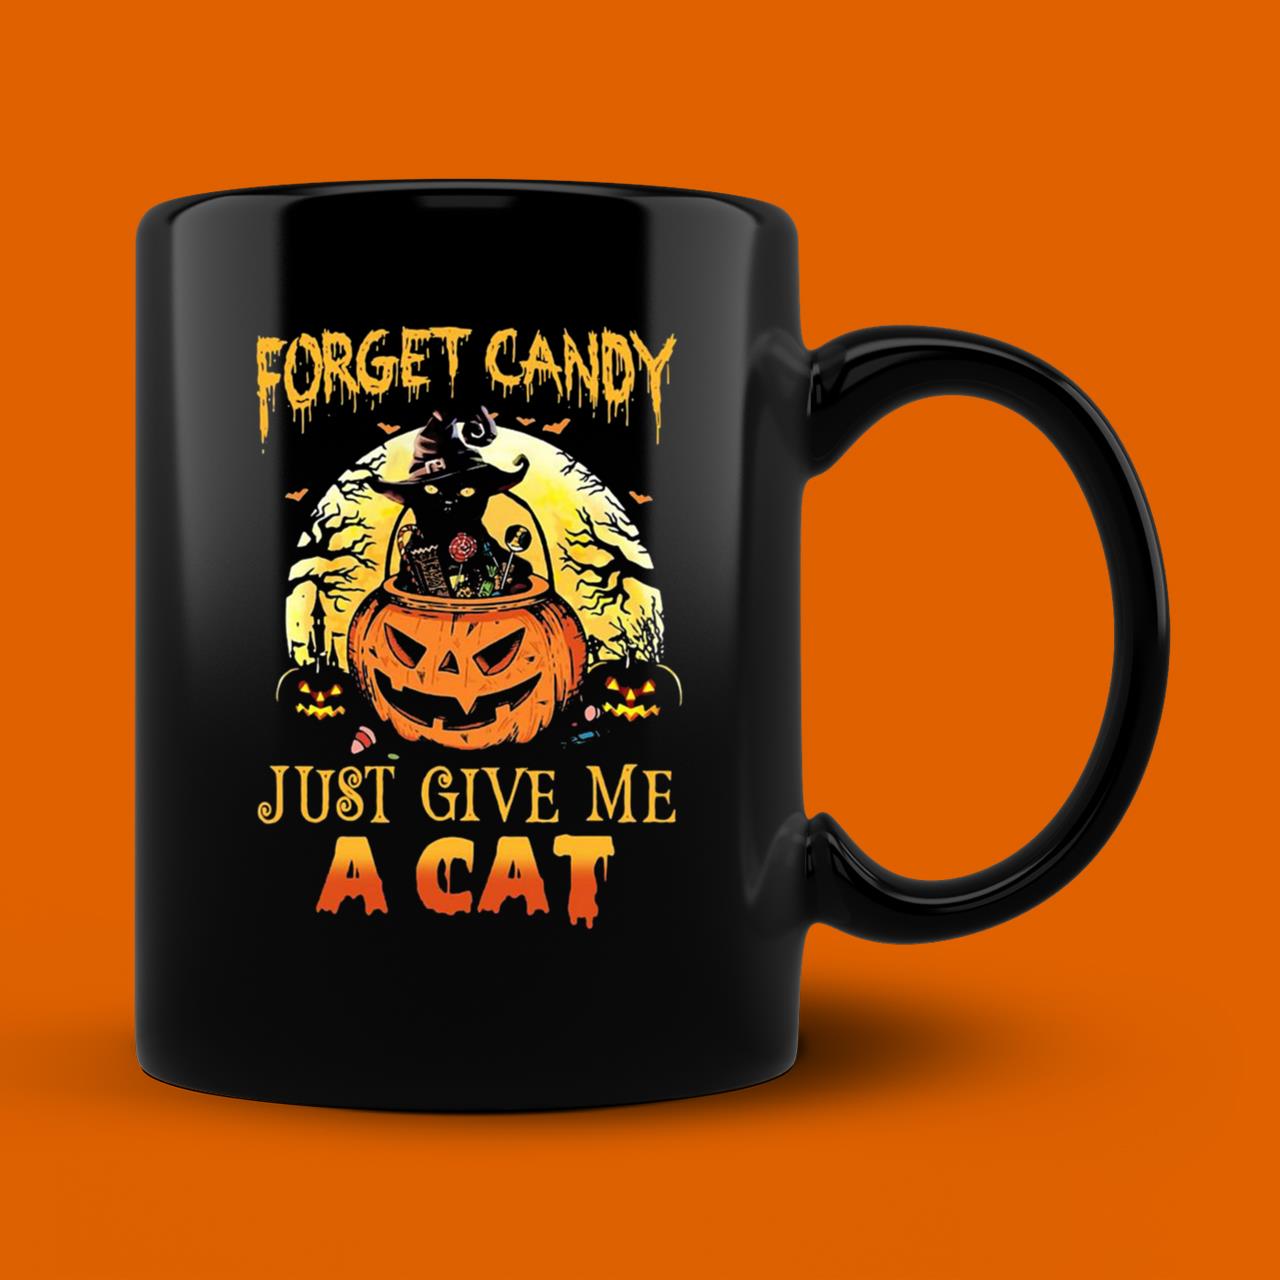 Forget Candy Just Give Me A Cat Halloween Shirt